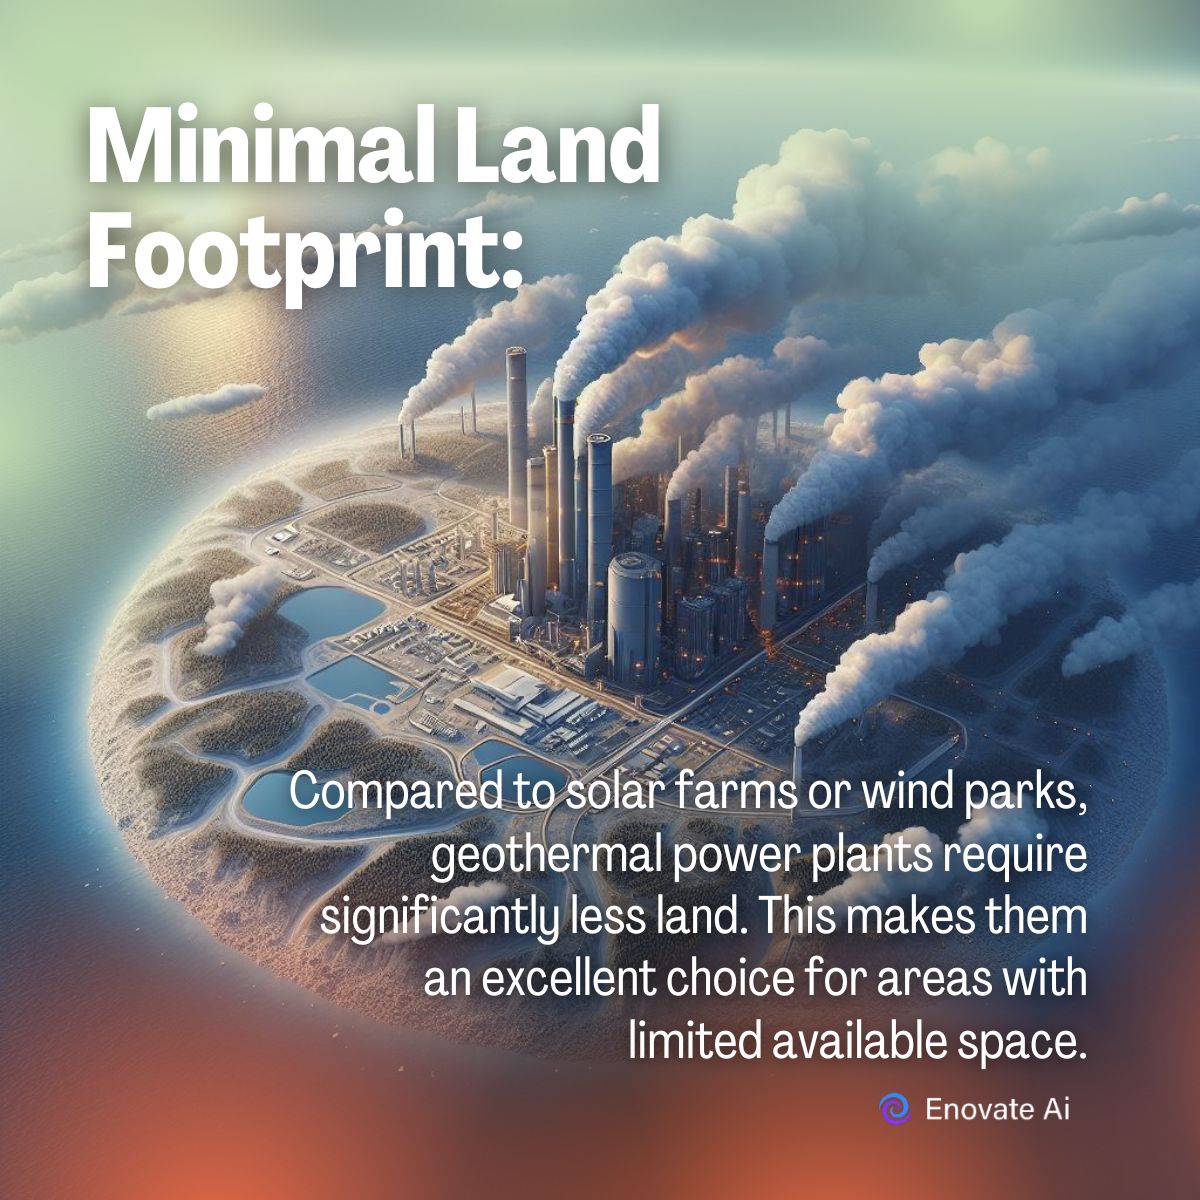 #GeothermalEnergy contributes to environmental conservation and it’s a fantastic choice for #EarthDay because:
Minimal Land Footprint: Compared to solar farms or wind parks, geothermal plants require significantly less land, being an excellent choice for areas with limited space.